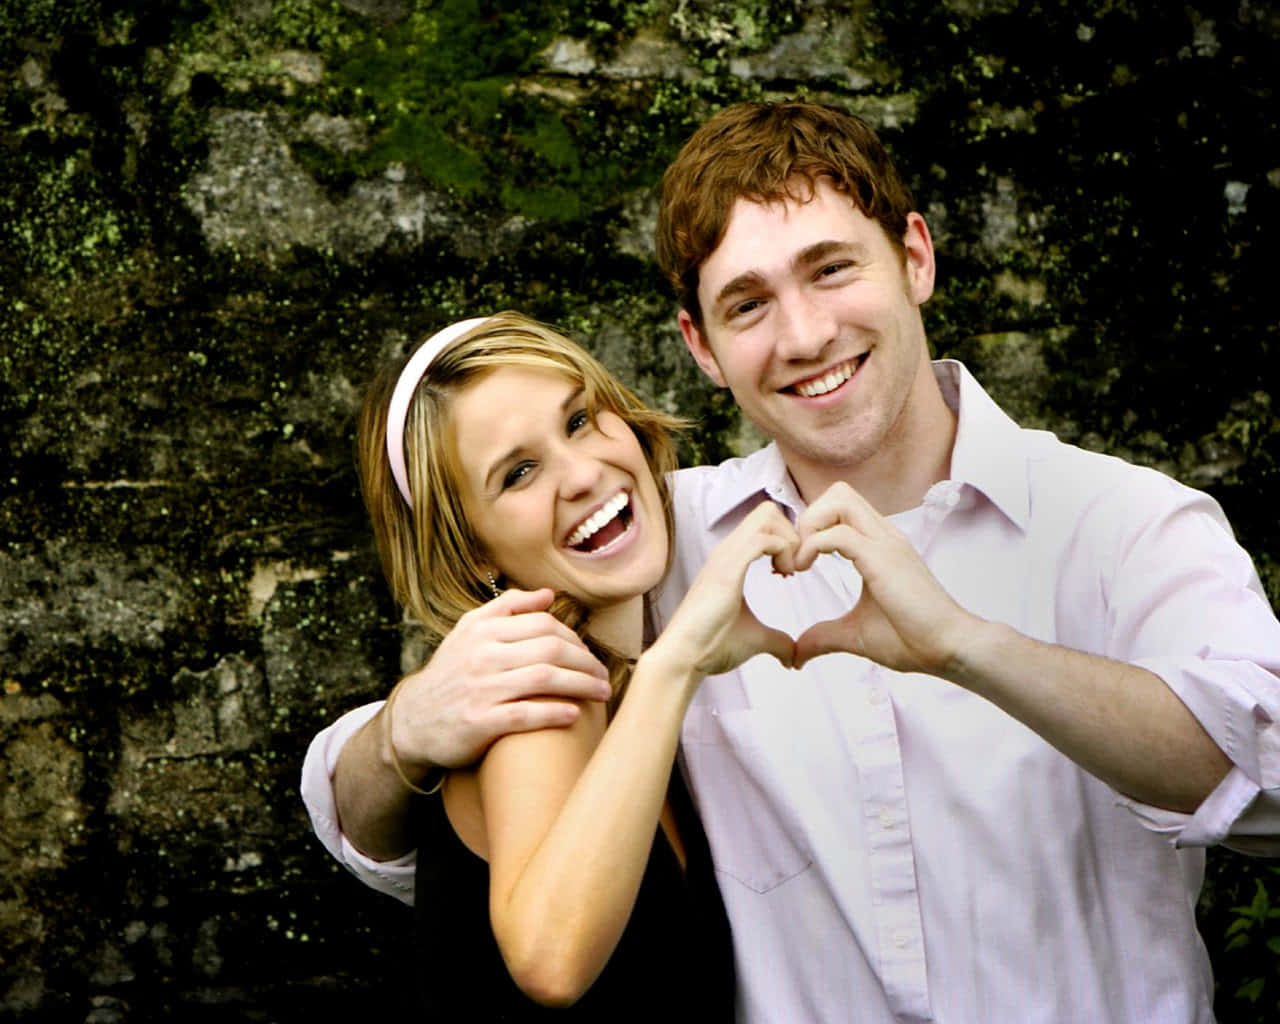 Happy Couples Hearts  Pictures